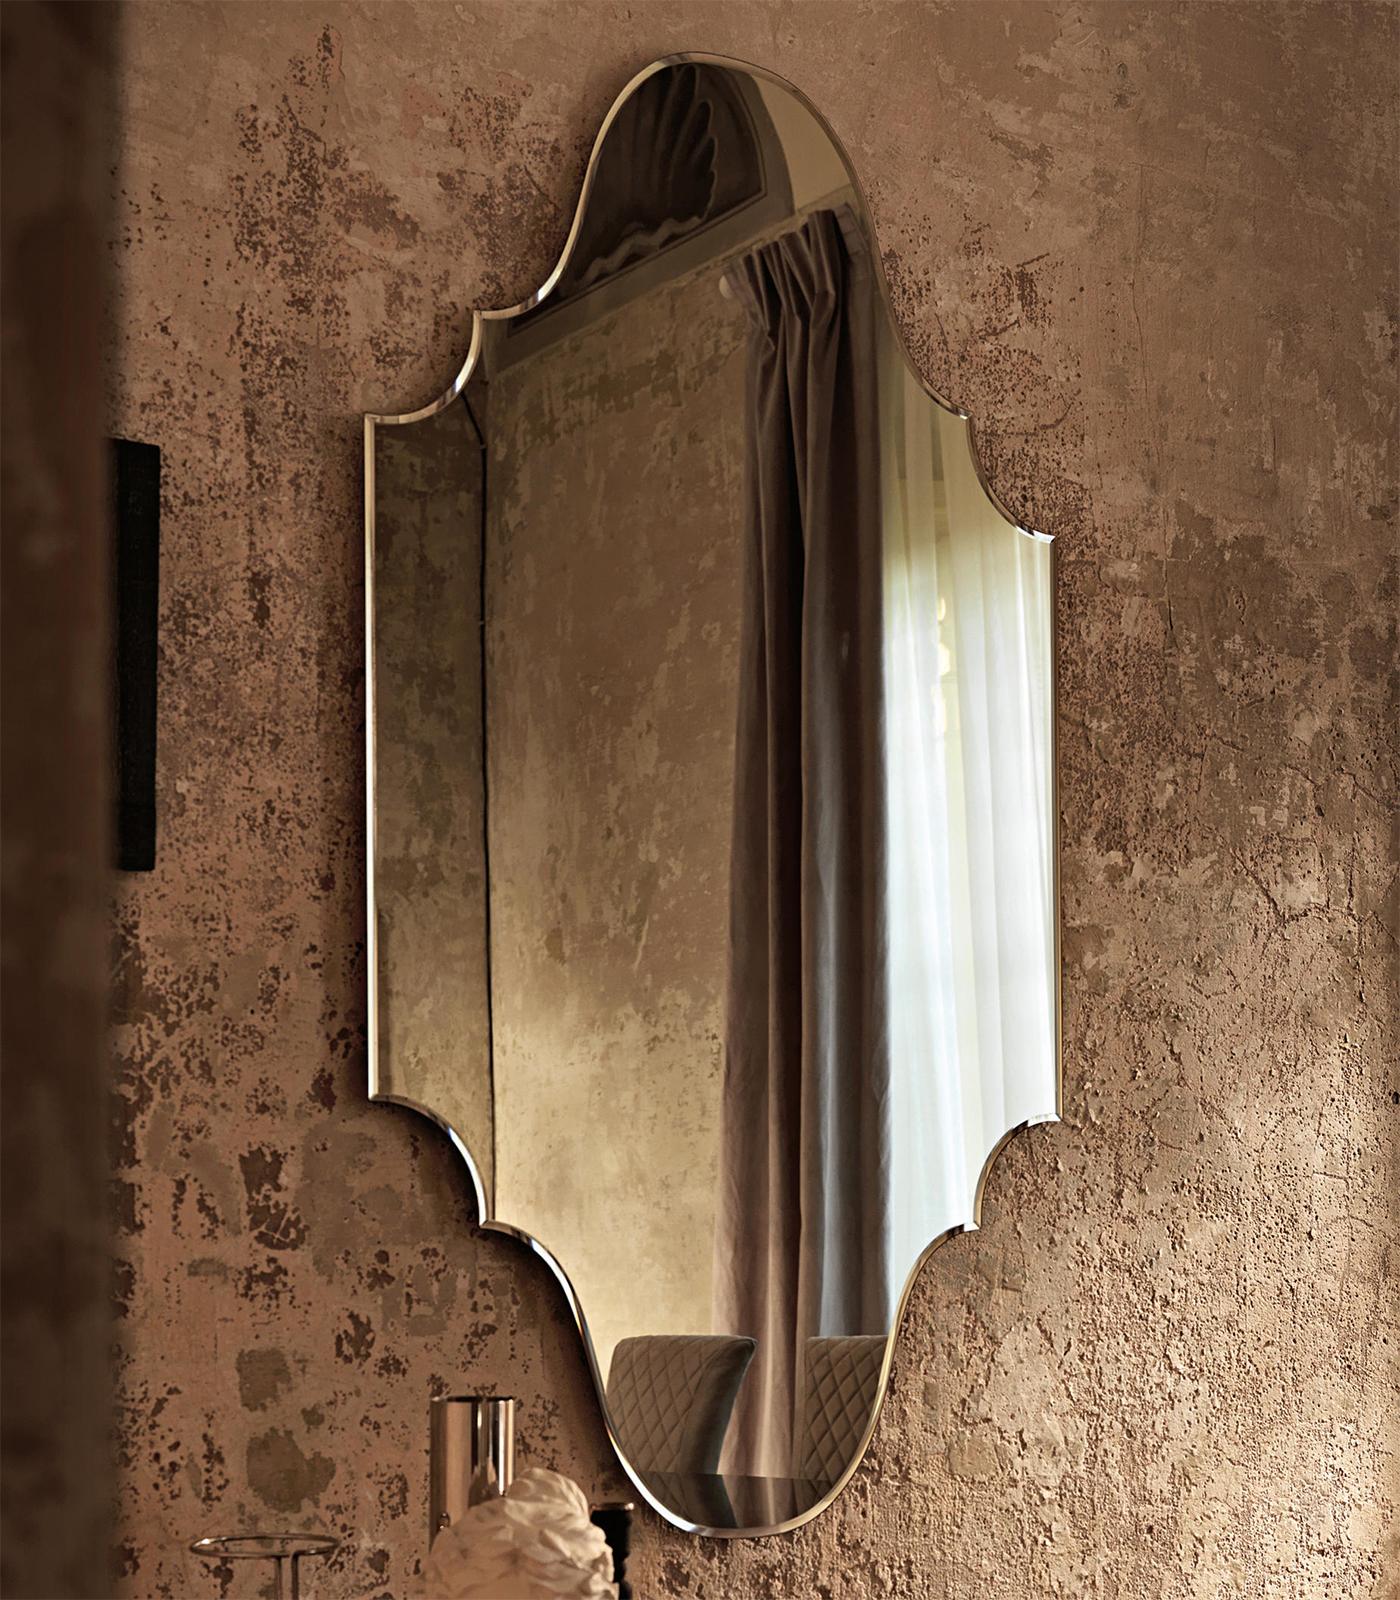 Mirror Taglia with all mirror in smocked
glass, 6mm thickness. With bevelled edges.